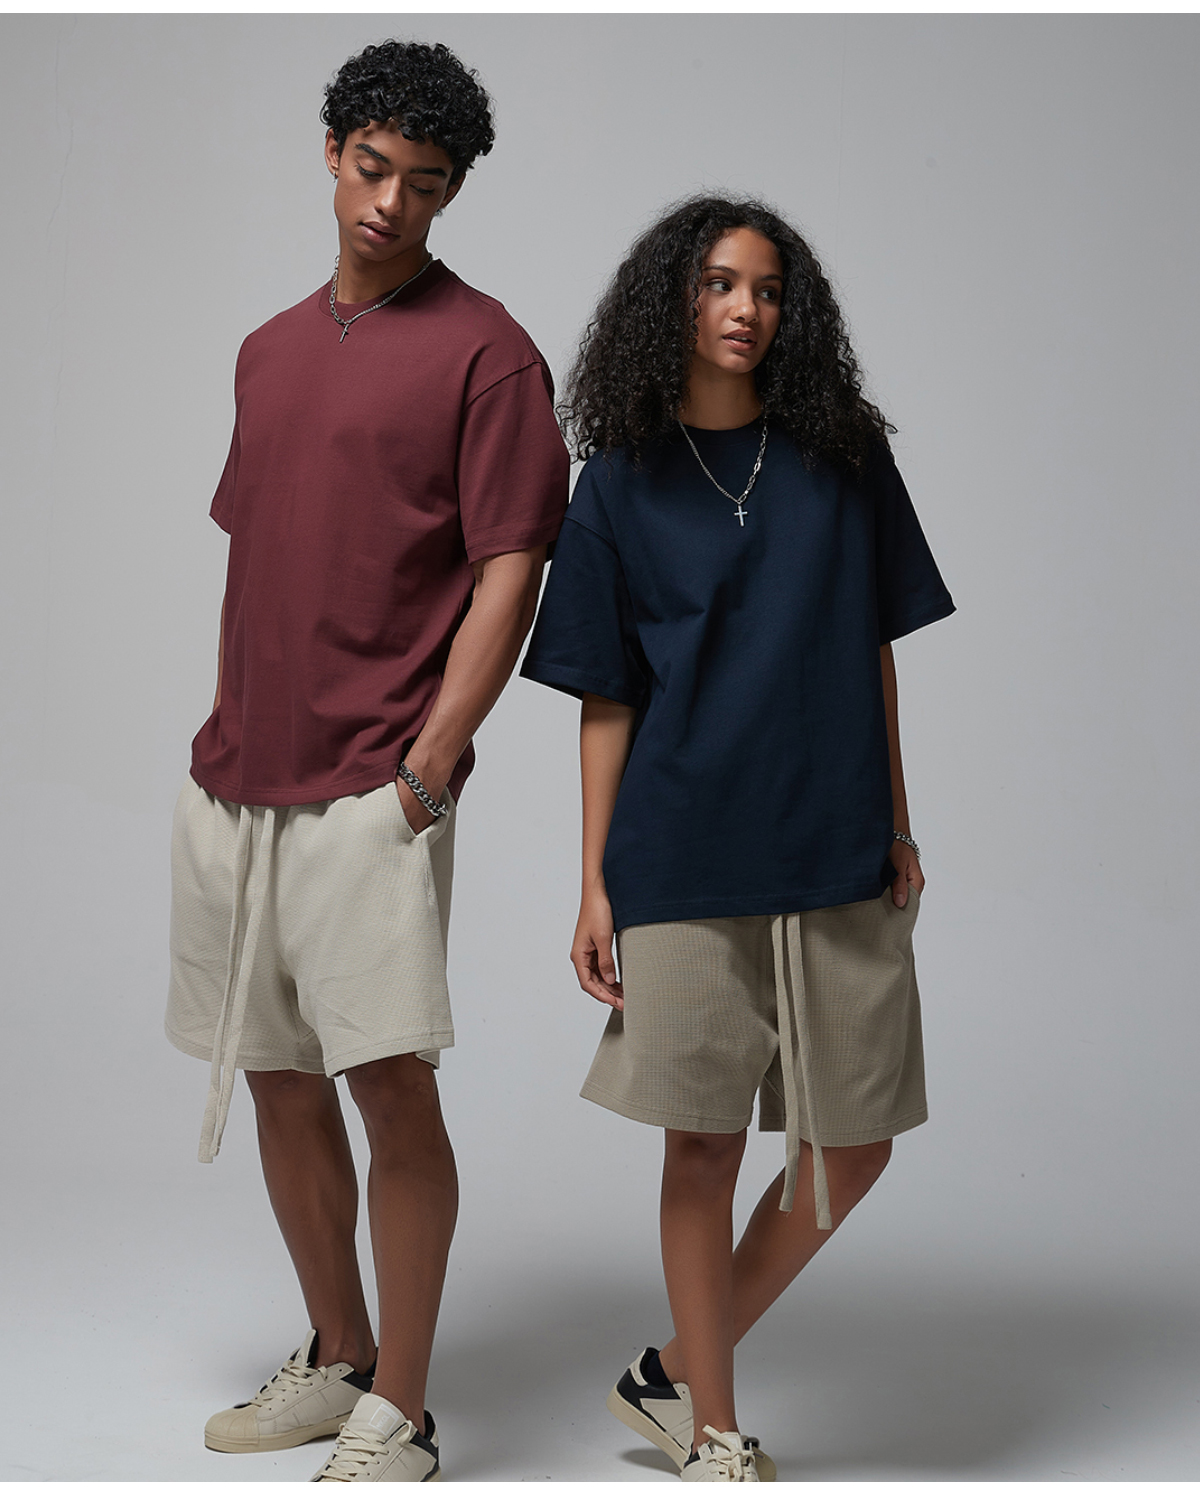 #AR005 Thick 305G Cotton Oversized Blank T-Shirt 33